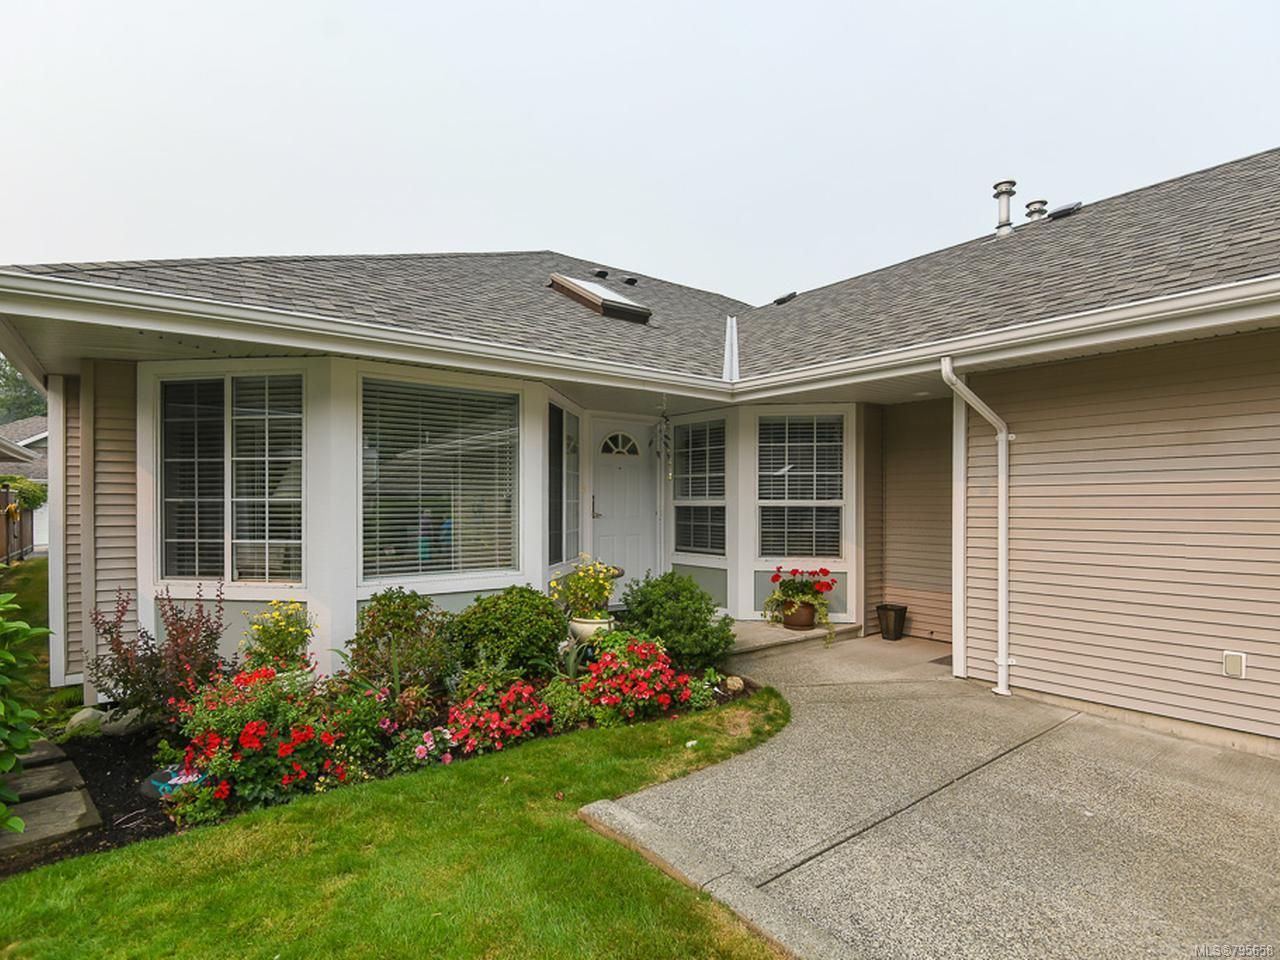 Main Photo: 16 2010 20TH STREET in COURTENAY: CV Courtenay City Row/Townhouse for sale (Comox Valley)  : MLS®# 795658